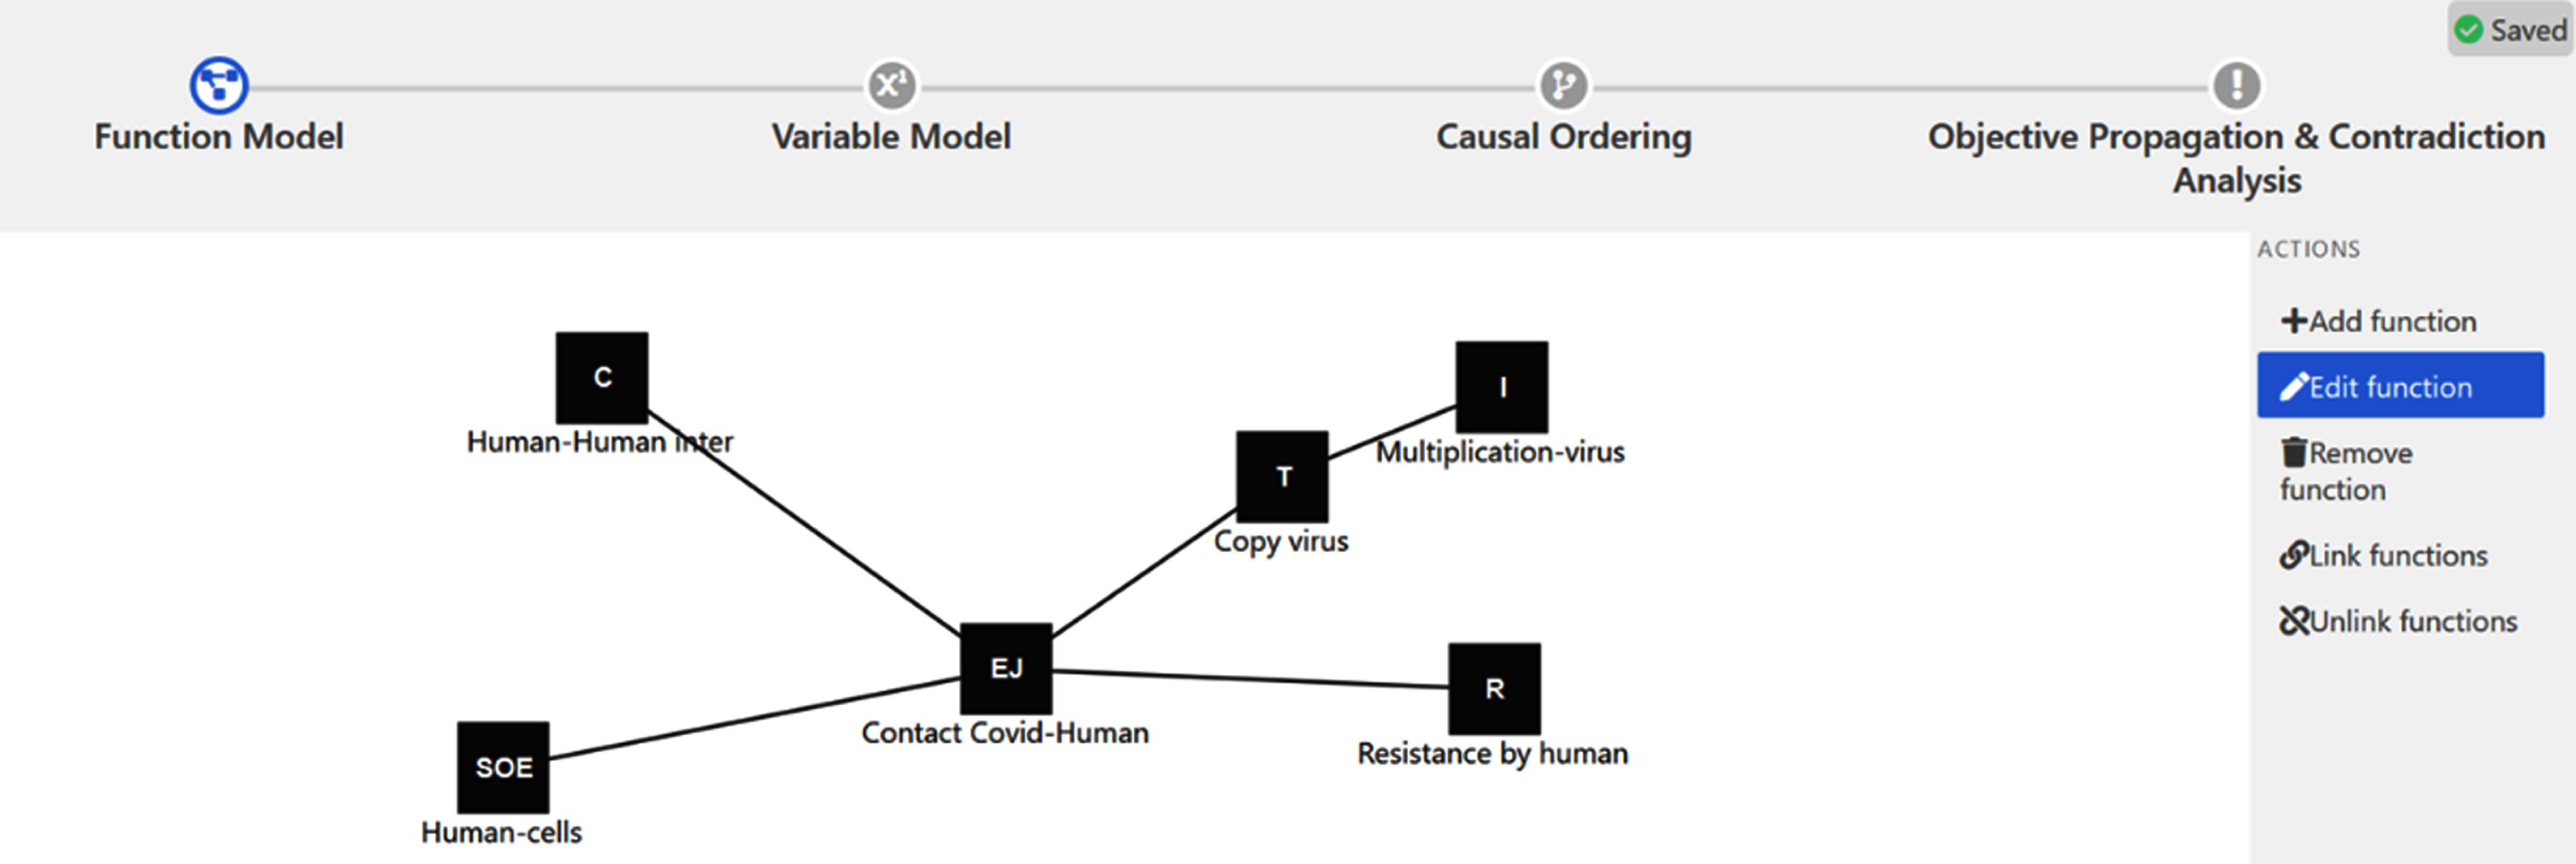 Functional/organ modelling phase presenting one of the routes for generating a causal graph.